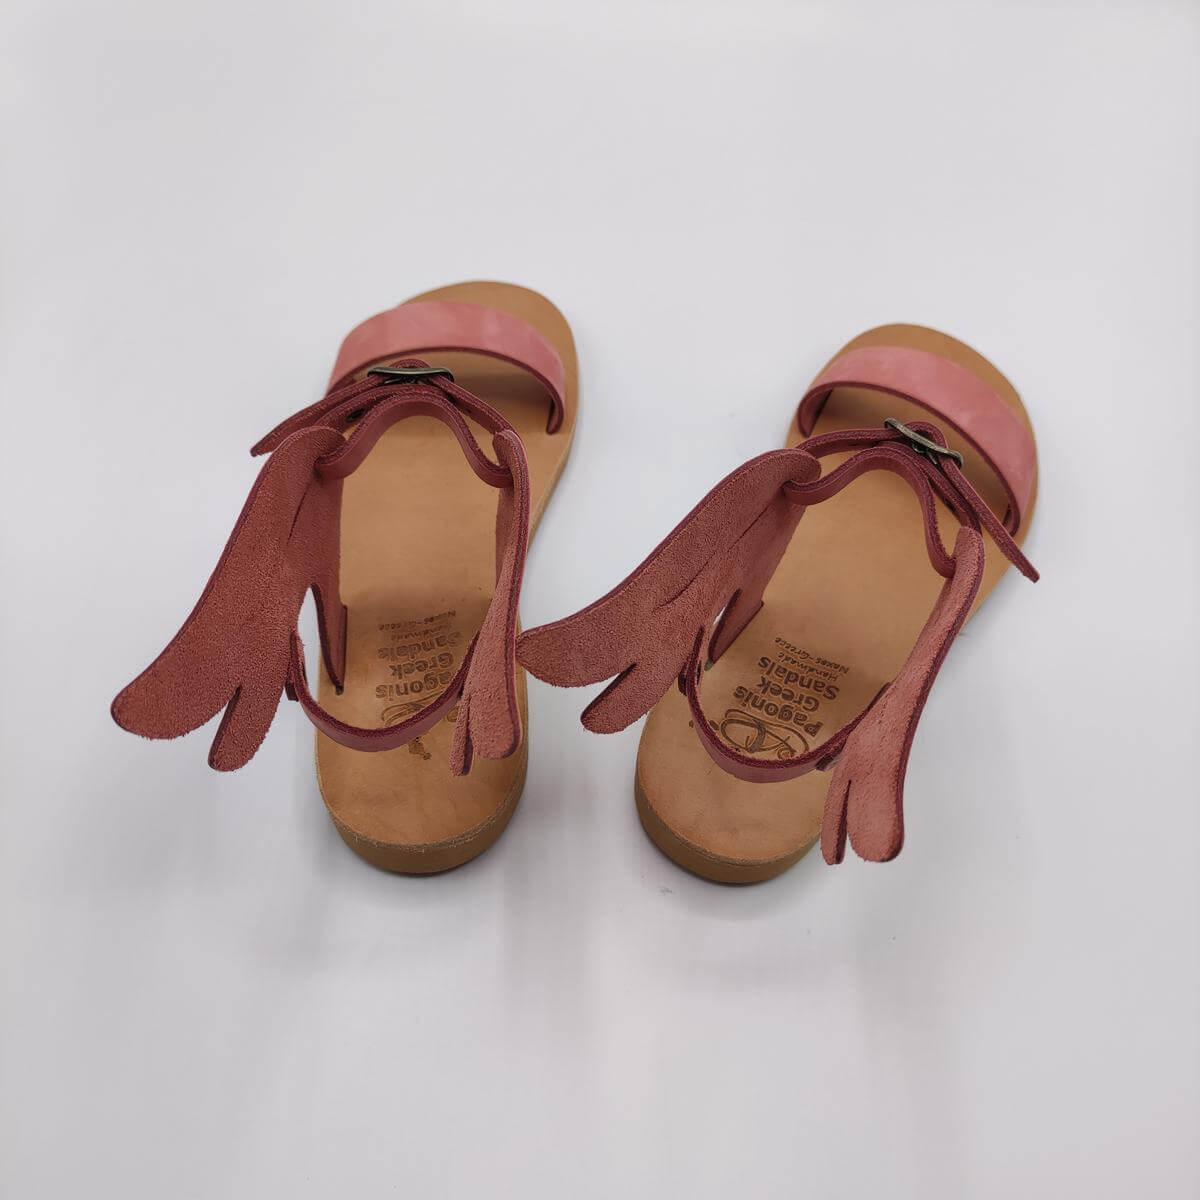 Kids Sandals With Wings Without Toe Strap Pink